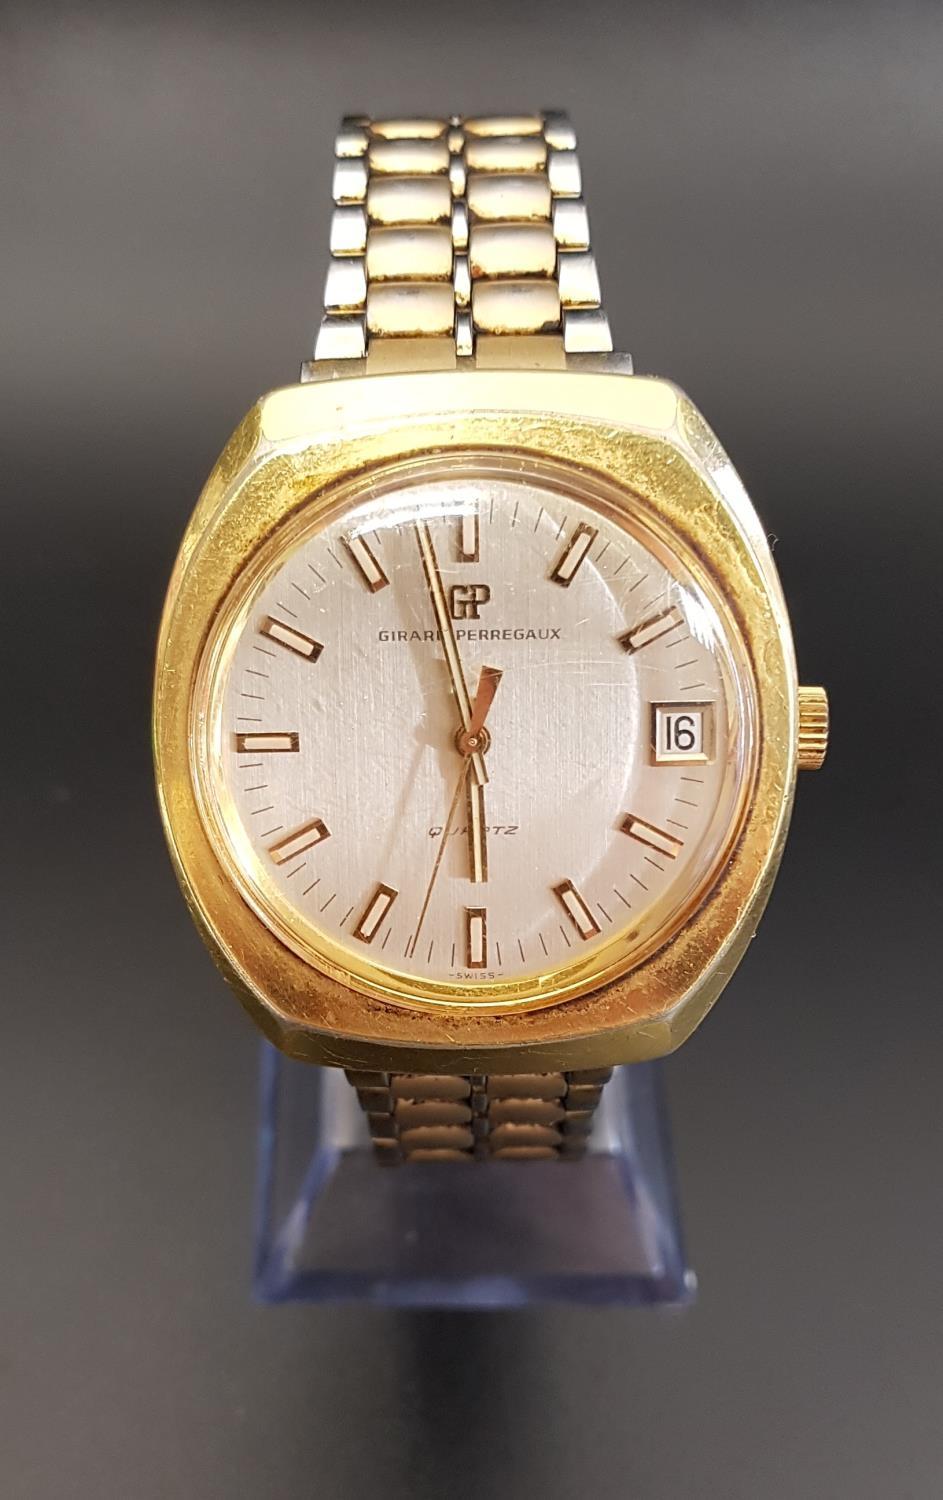 1970s GIRARD PERREGAUX GENTLEMEN'S WRISTWATCH the gilt dial with baton five minute markers and